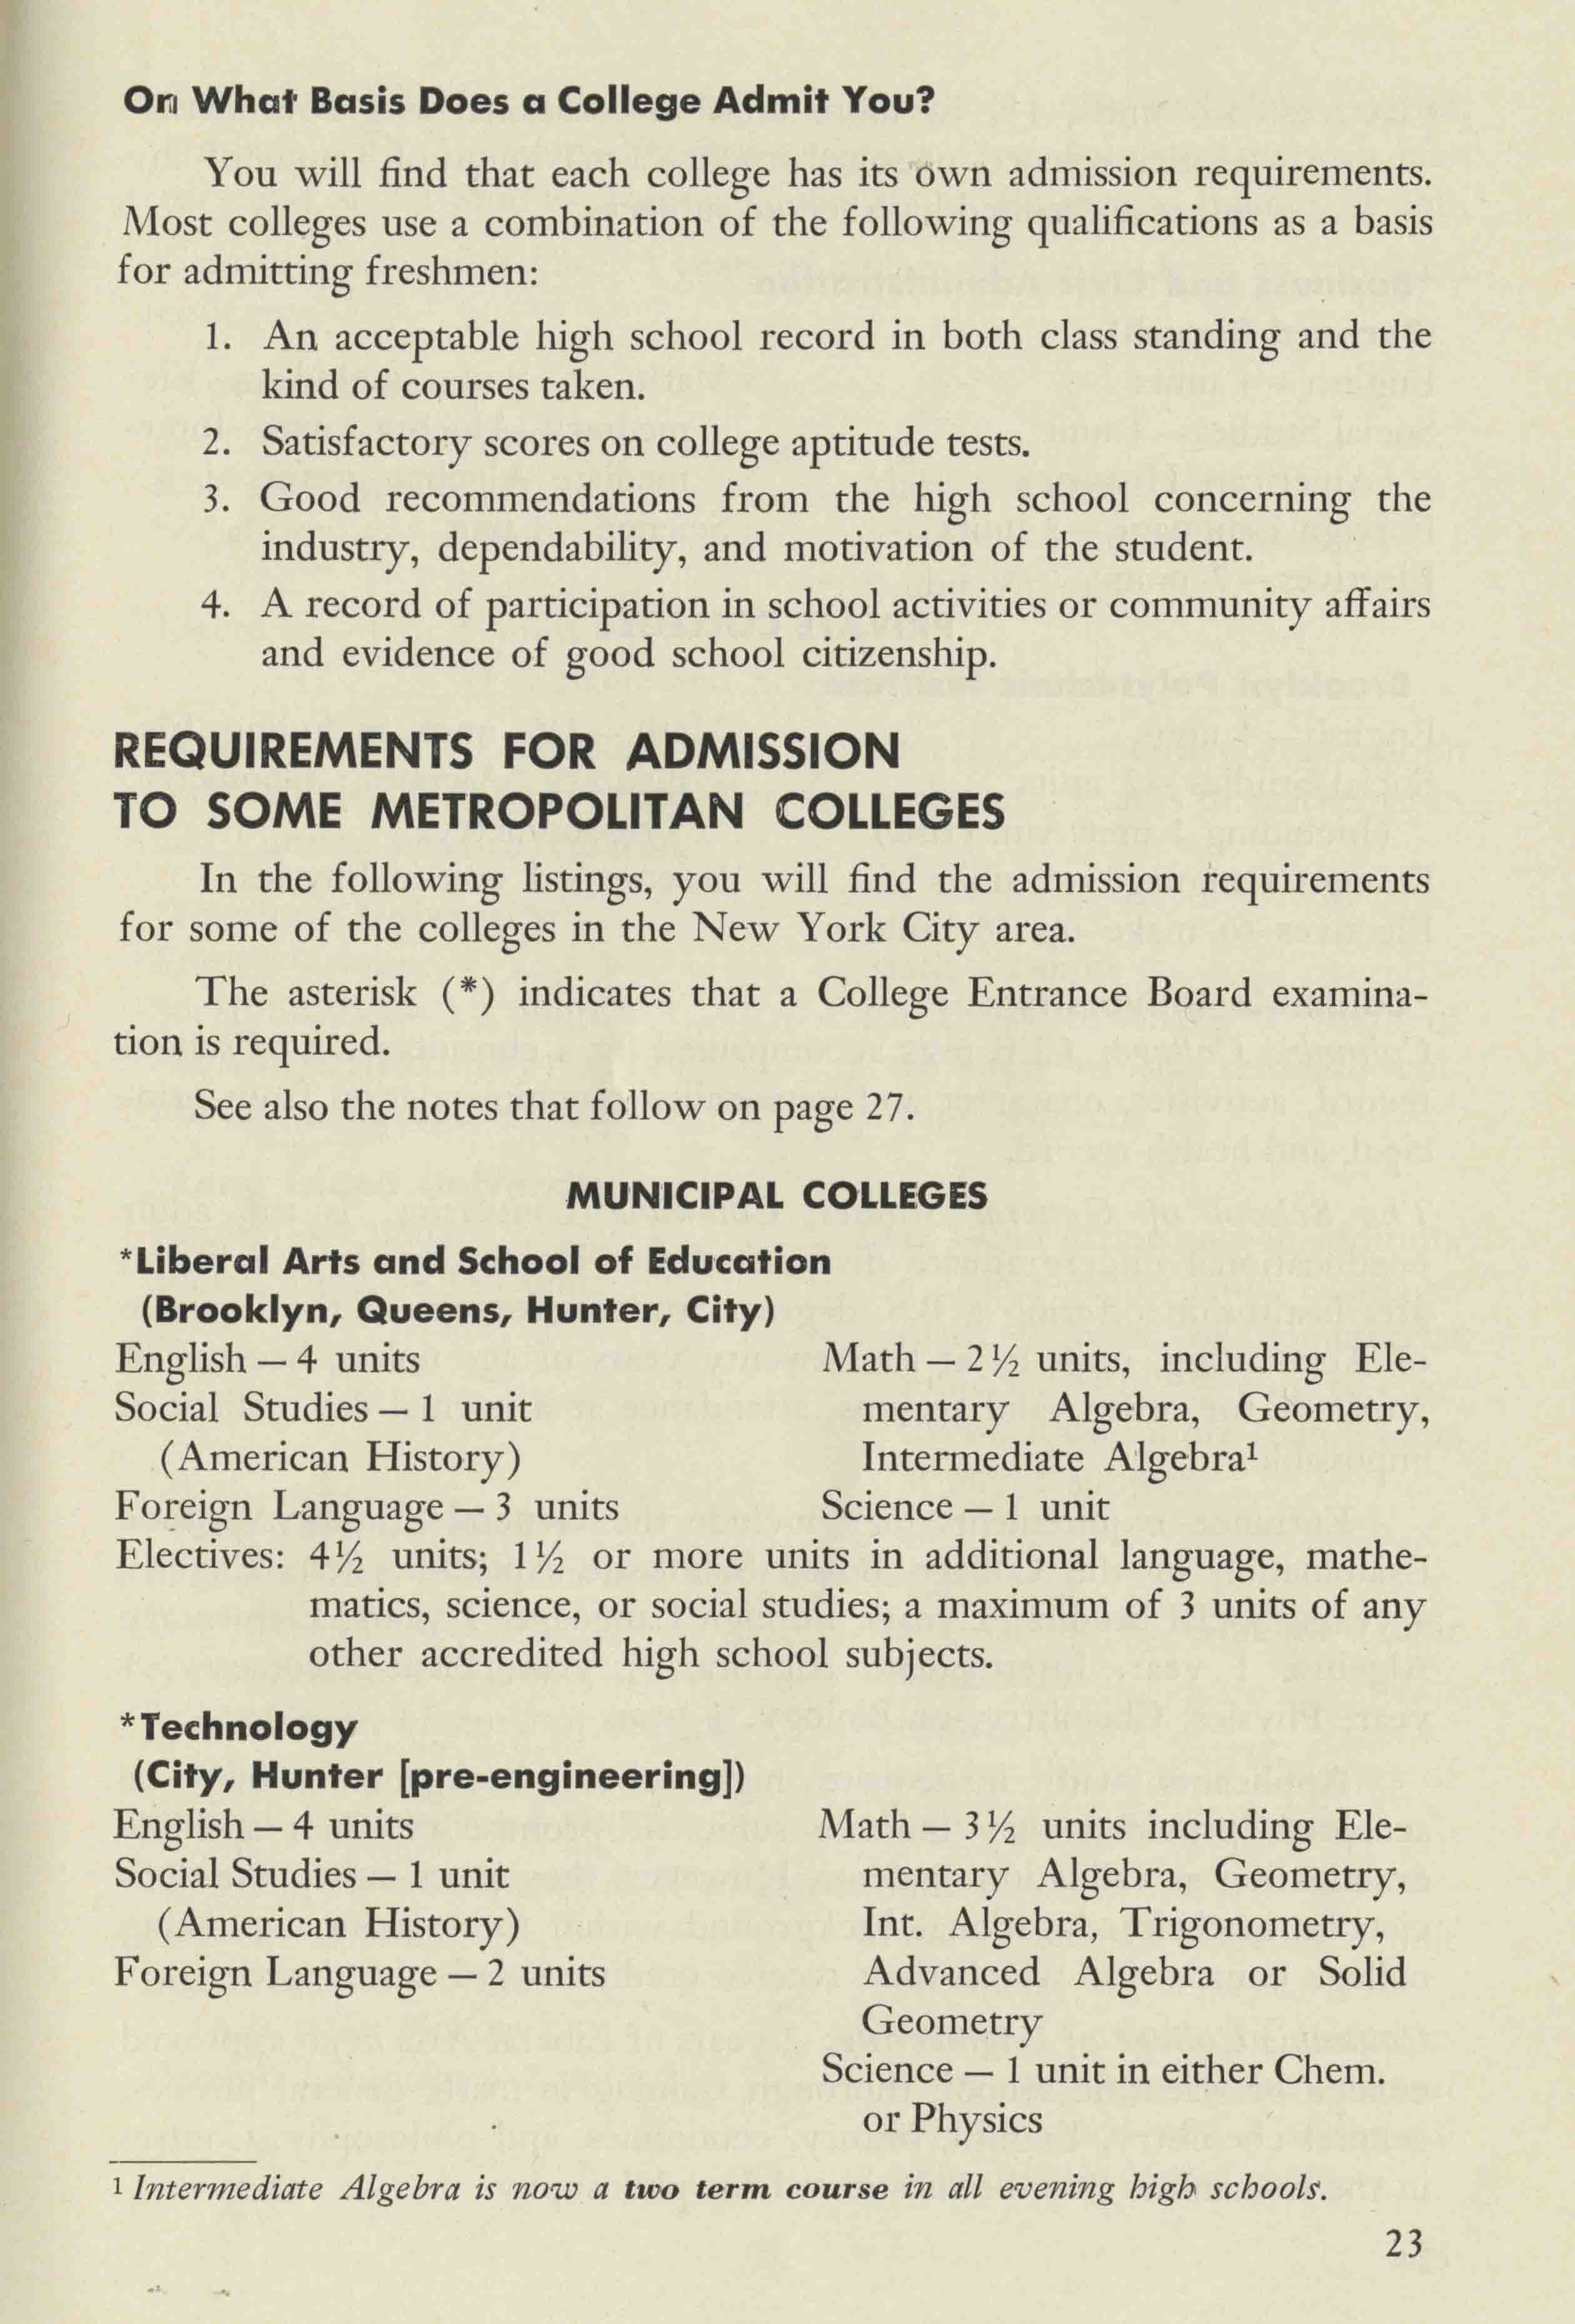 Lists general requirements for most colleges in 1961